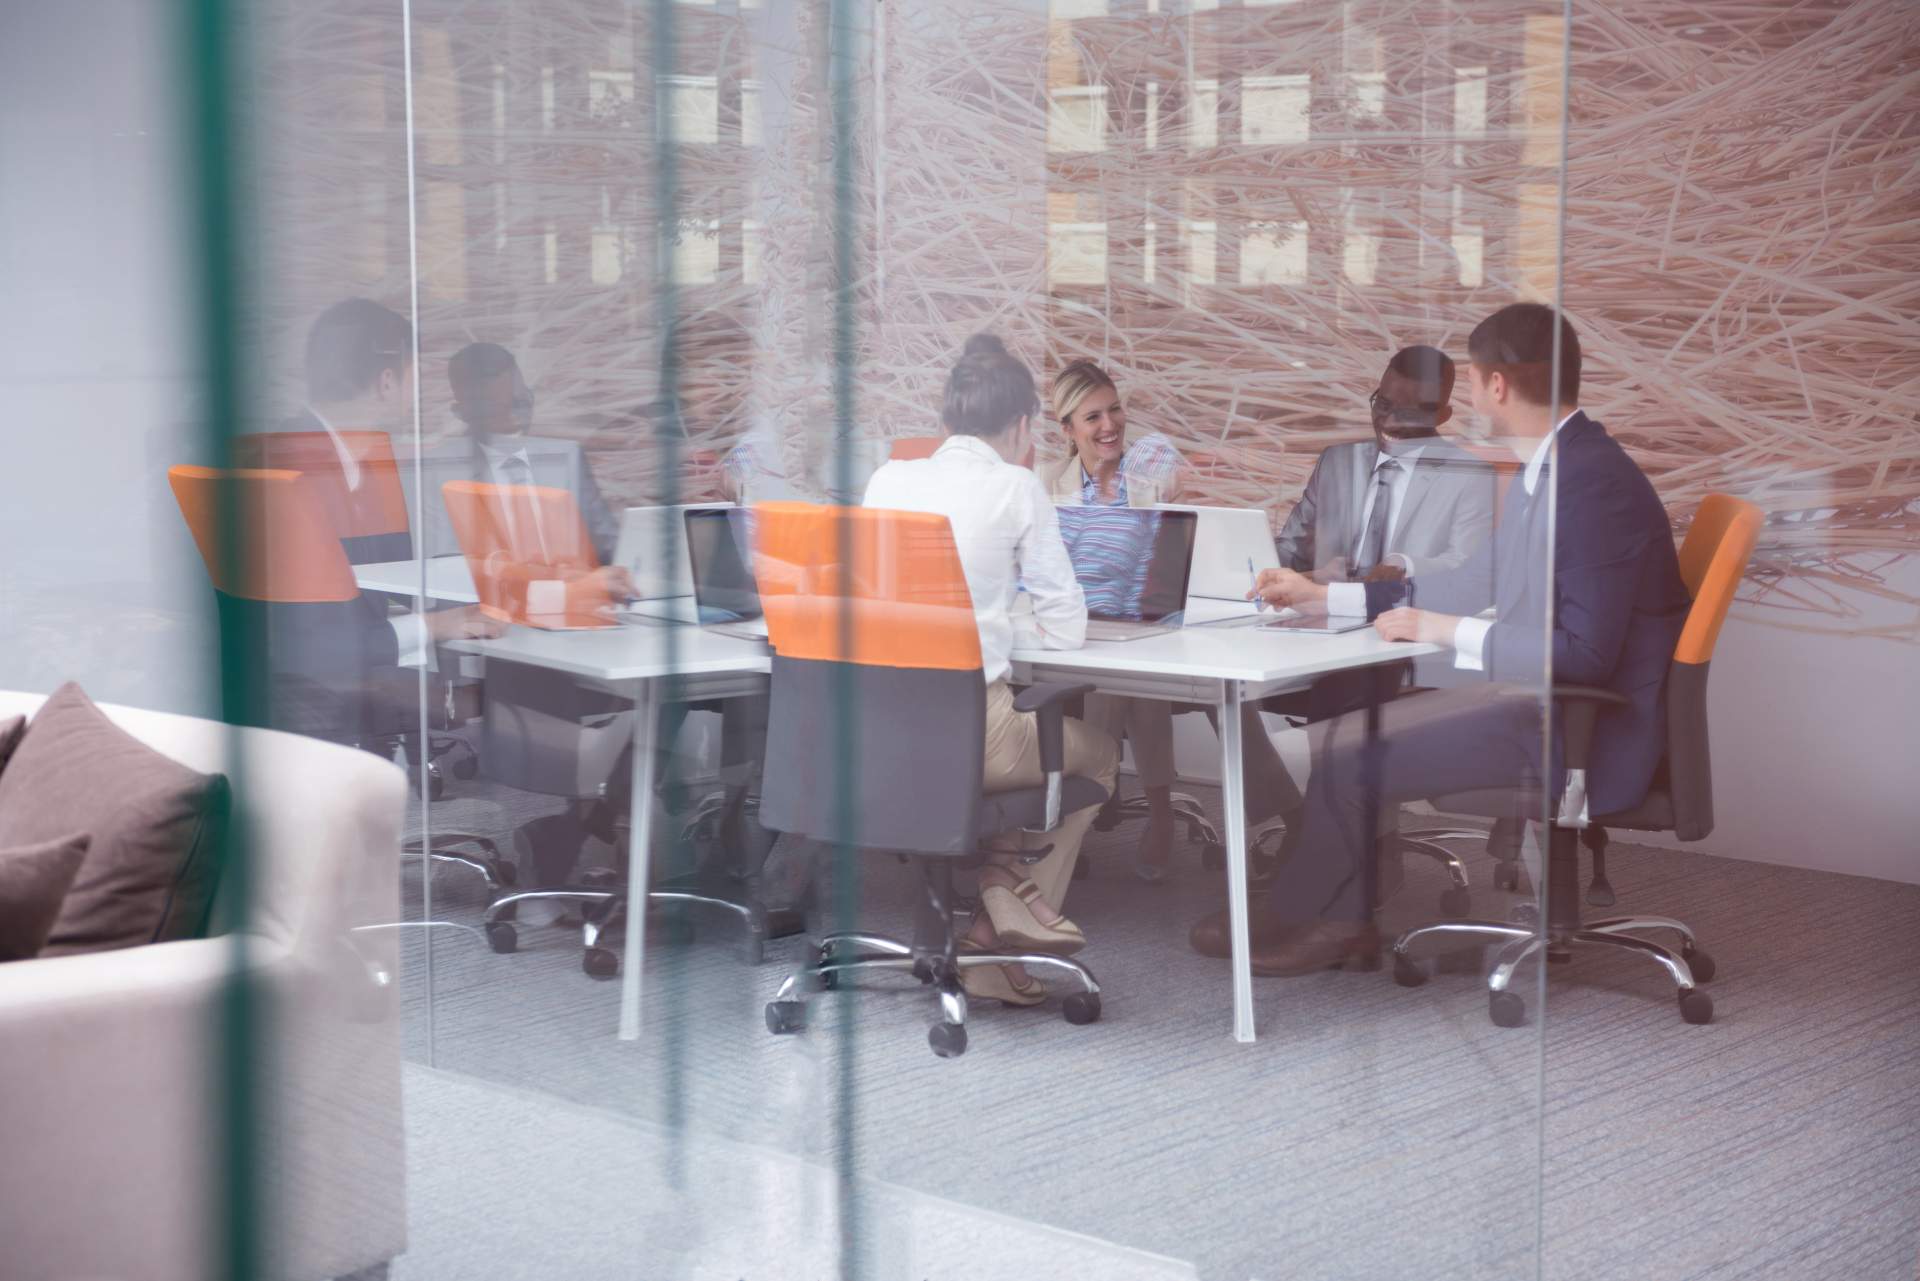 Employees sitting around a conference table in a conference room